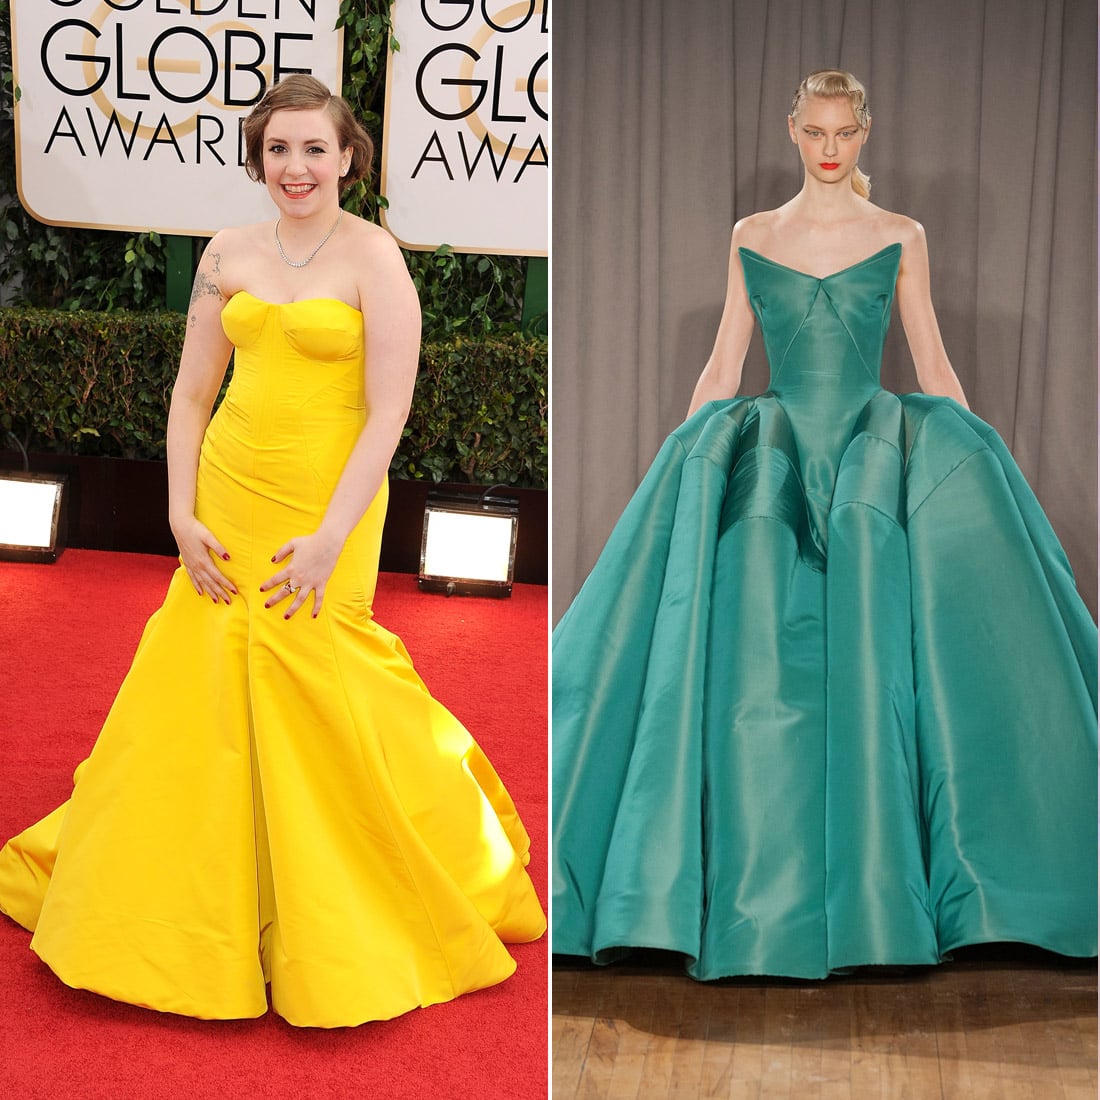 Lena Dunham What Will They Wear The 2014 Emmys Red